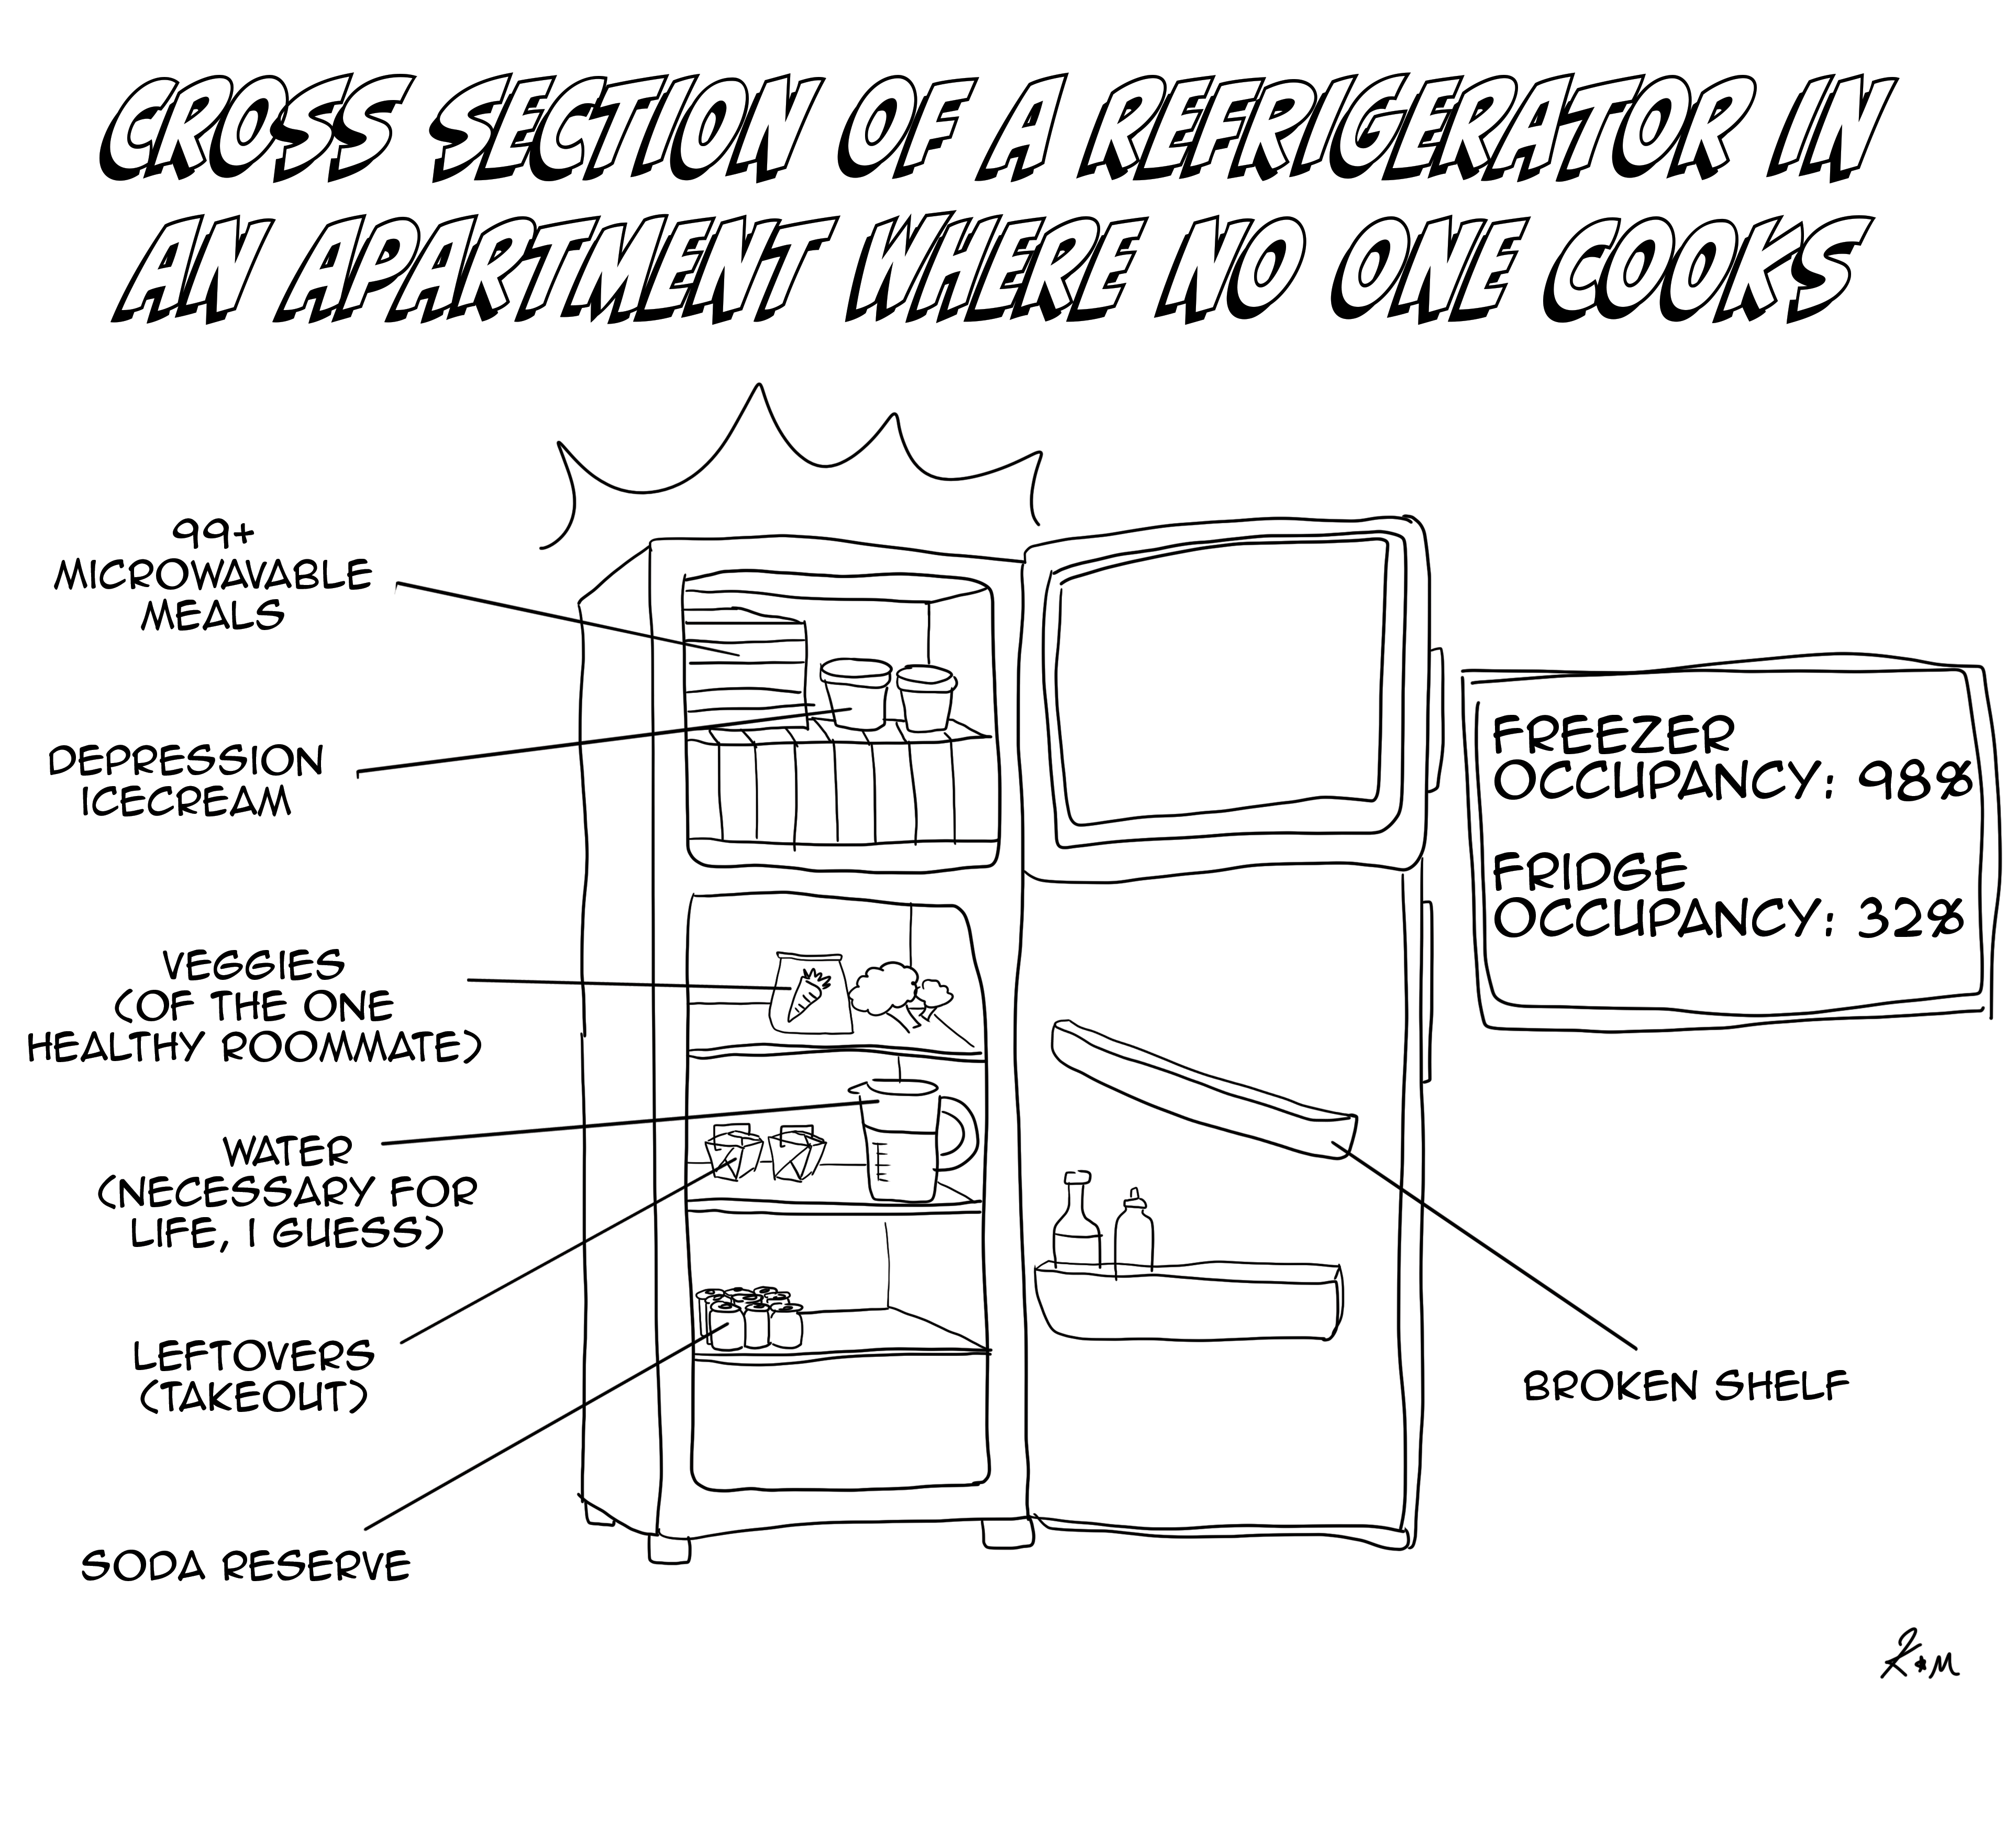 title: cross section of a refrigerator in an apartment where no one cooks. line drawing of a refrigerator with items in each section. labels: 99+ microwavable meals, depression ice cream, veggies of the one healthy roommate, water (necessary for life, I guess), leftovers (takeout), soda reserve, broken shelf. Freezer occupancy at 98%. Fridge occupancy at 32%.